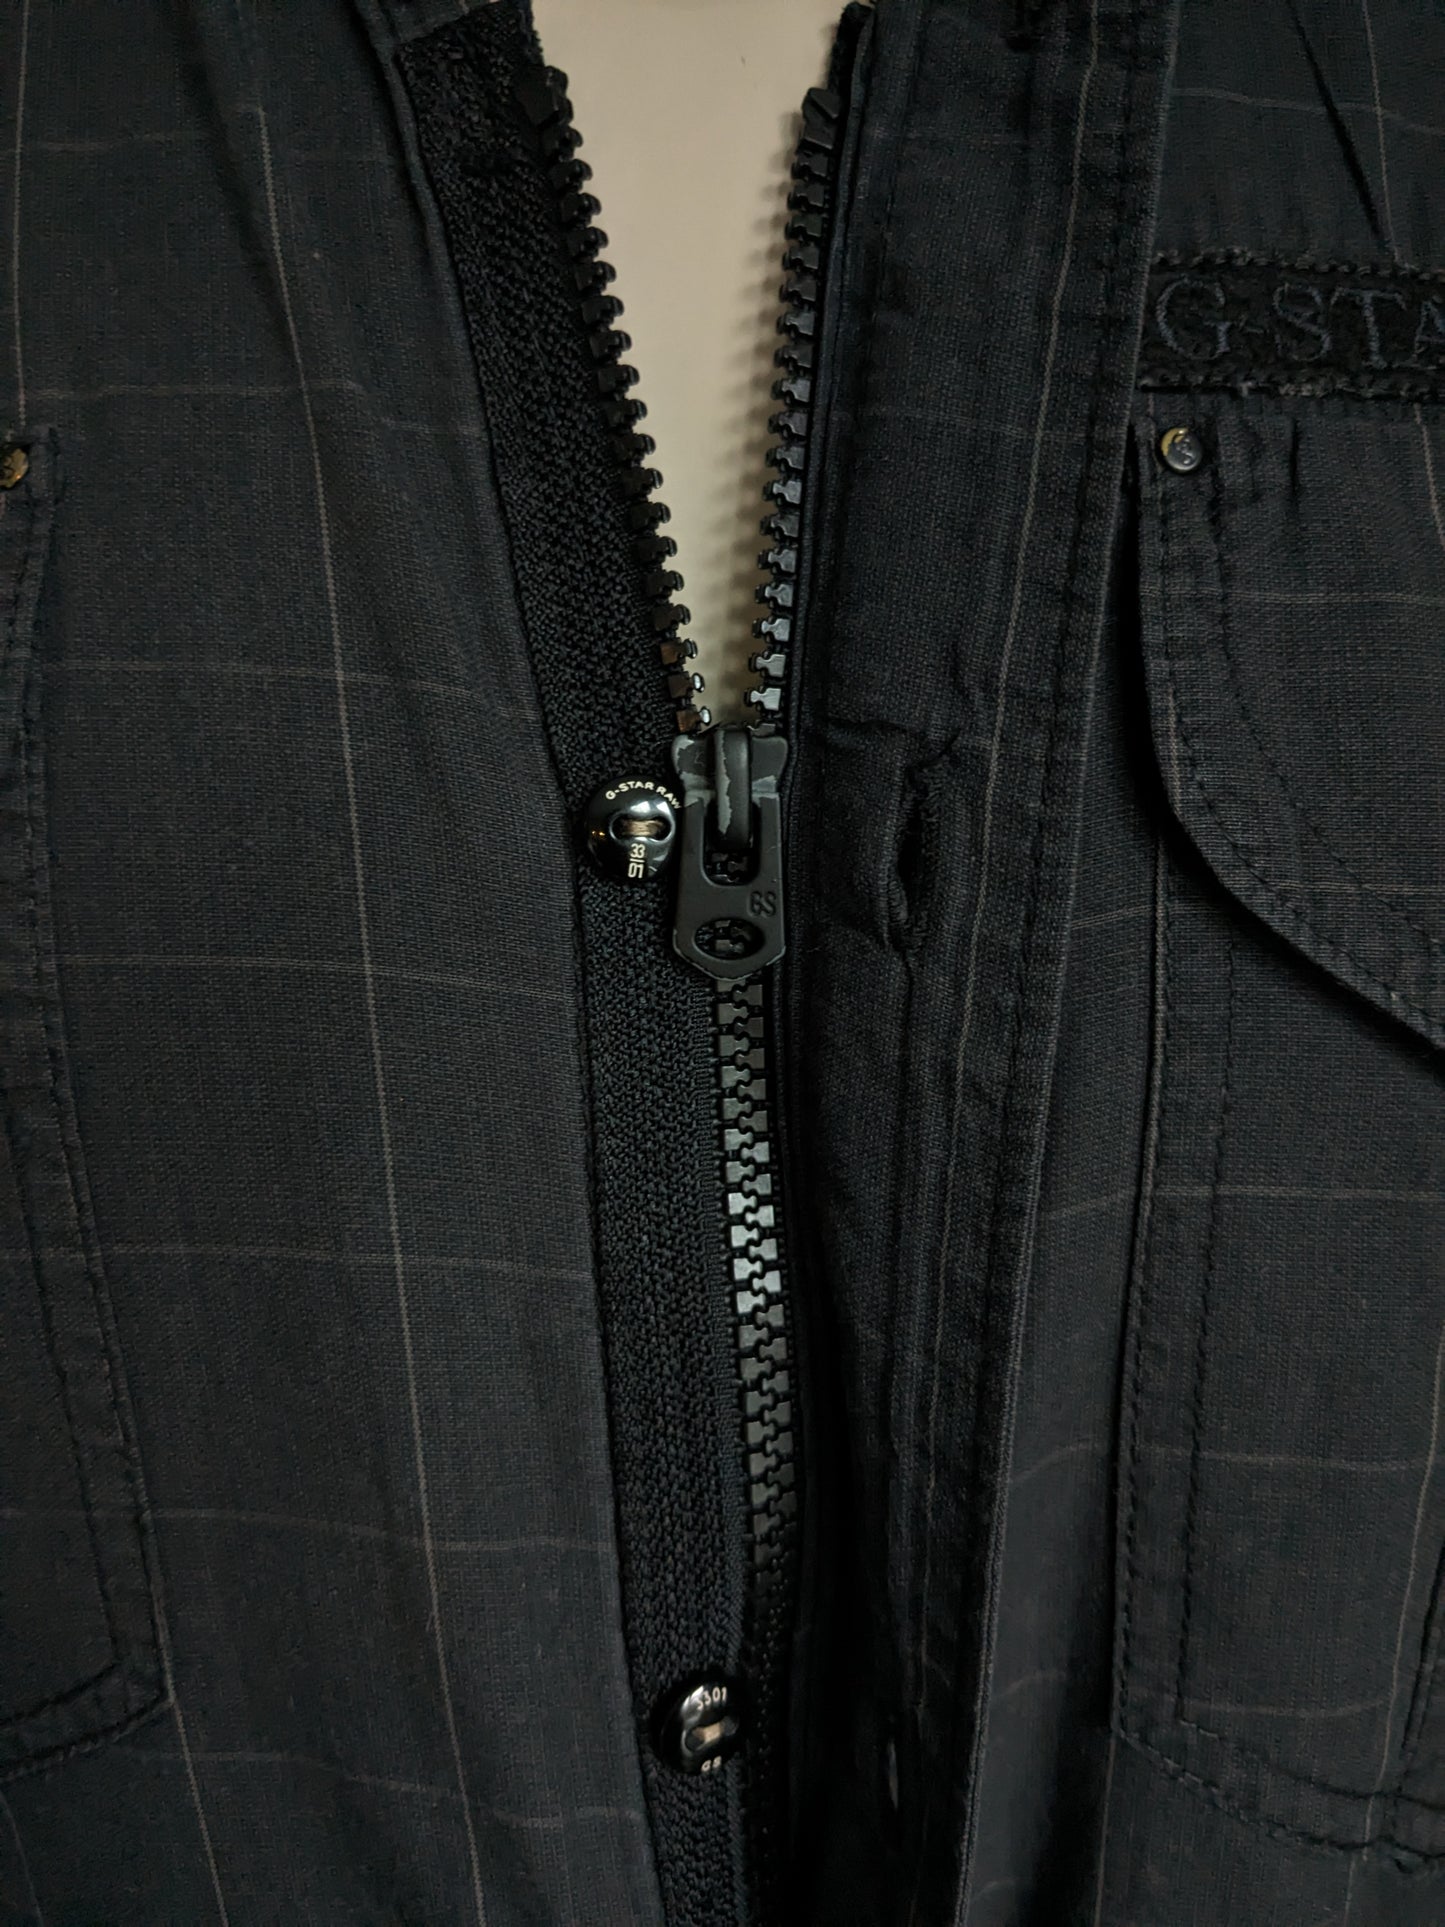 G-Star Raw shirt. With zipper and knots. Black gray checkered. Size L.